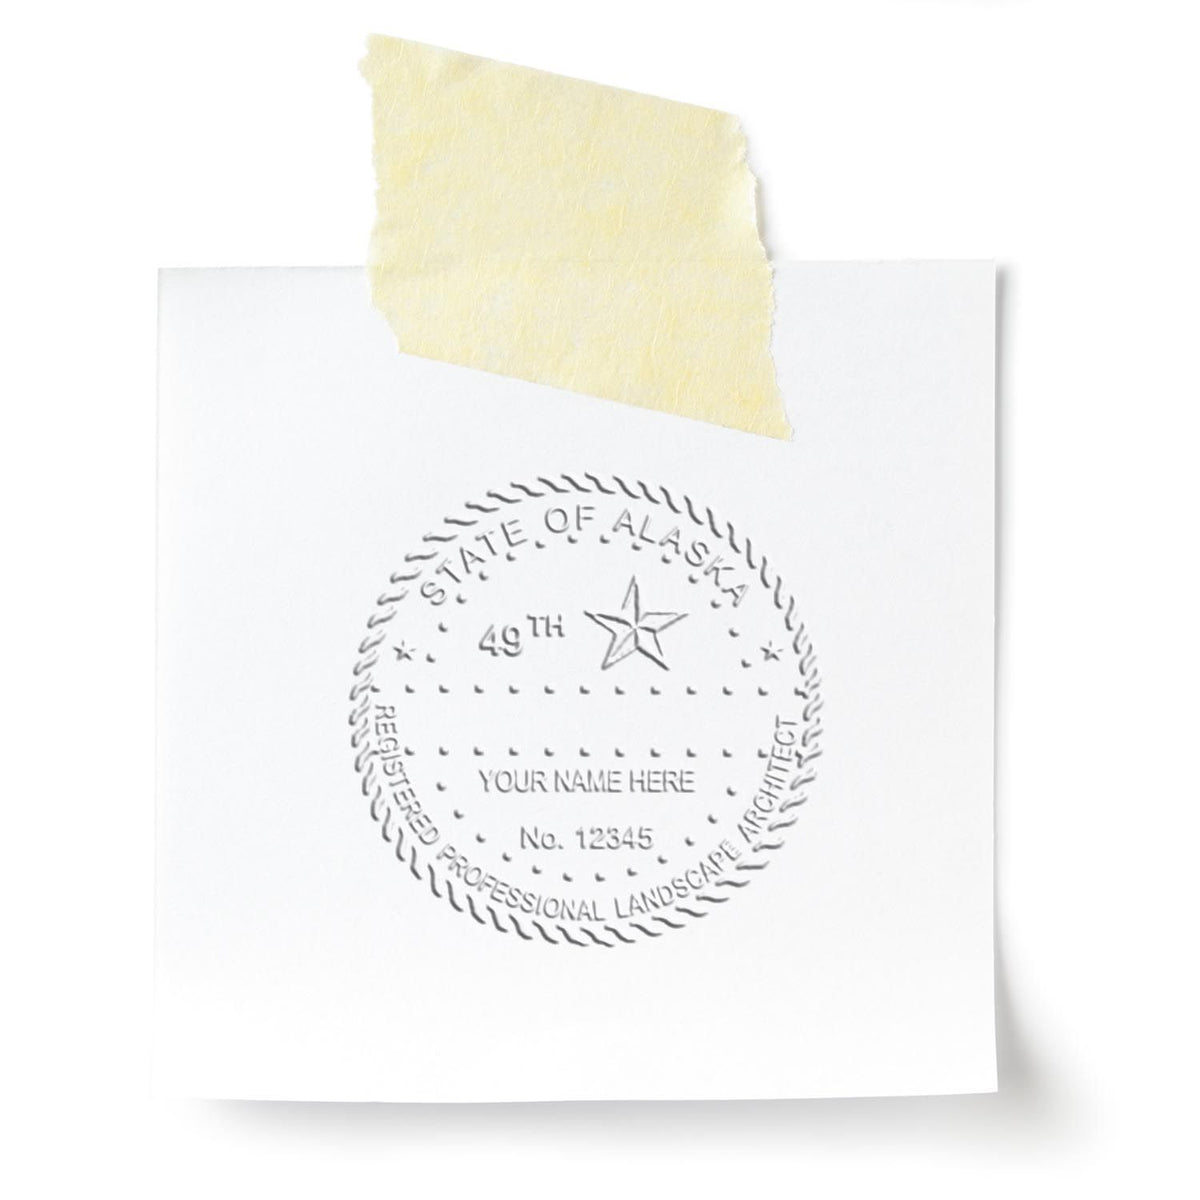 An in use photo of the Gift Alaska Landscape Architect Seal showing a sample imprint on a cardstock